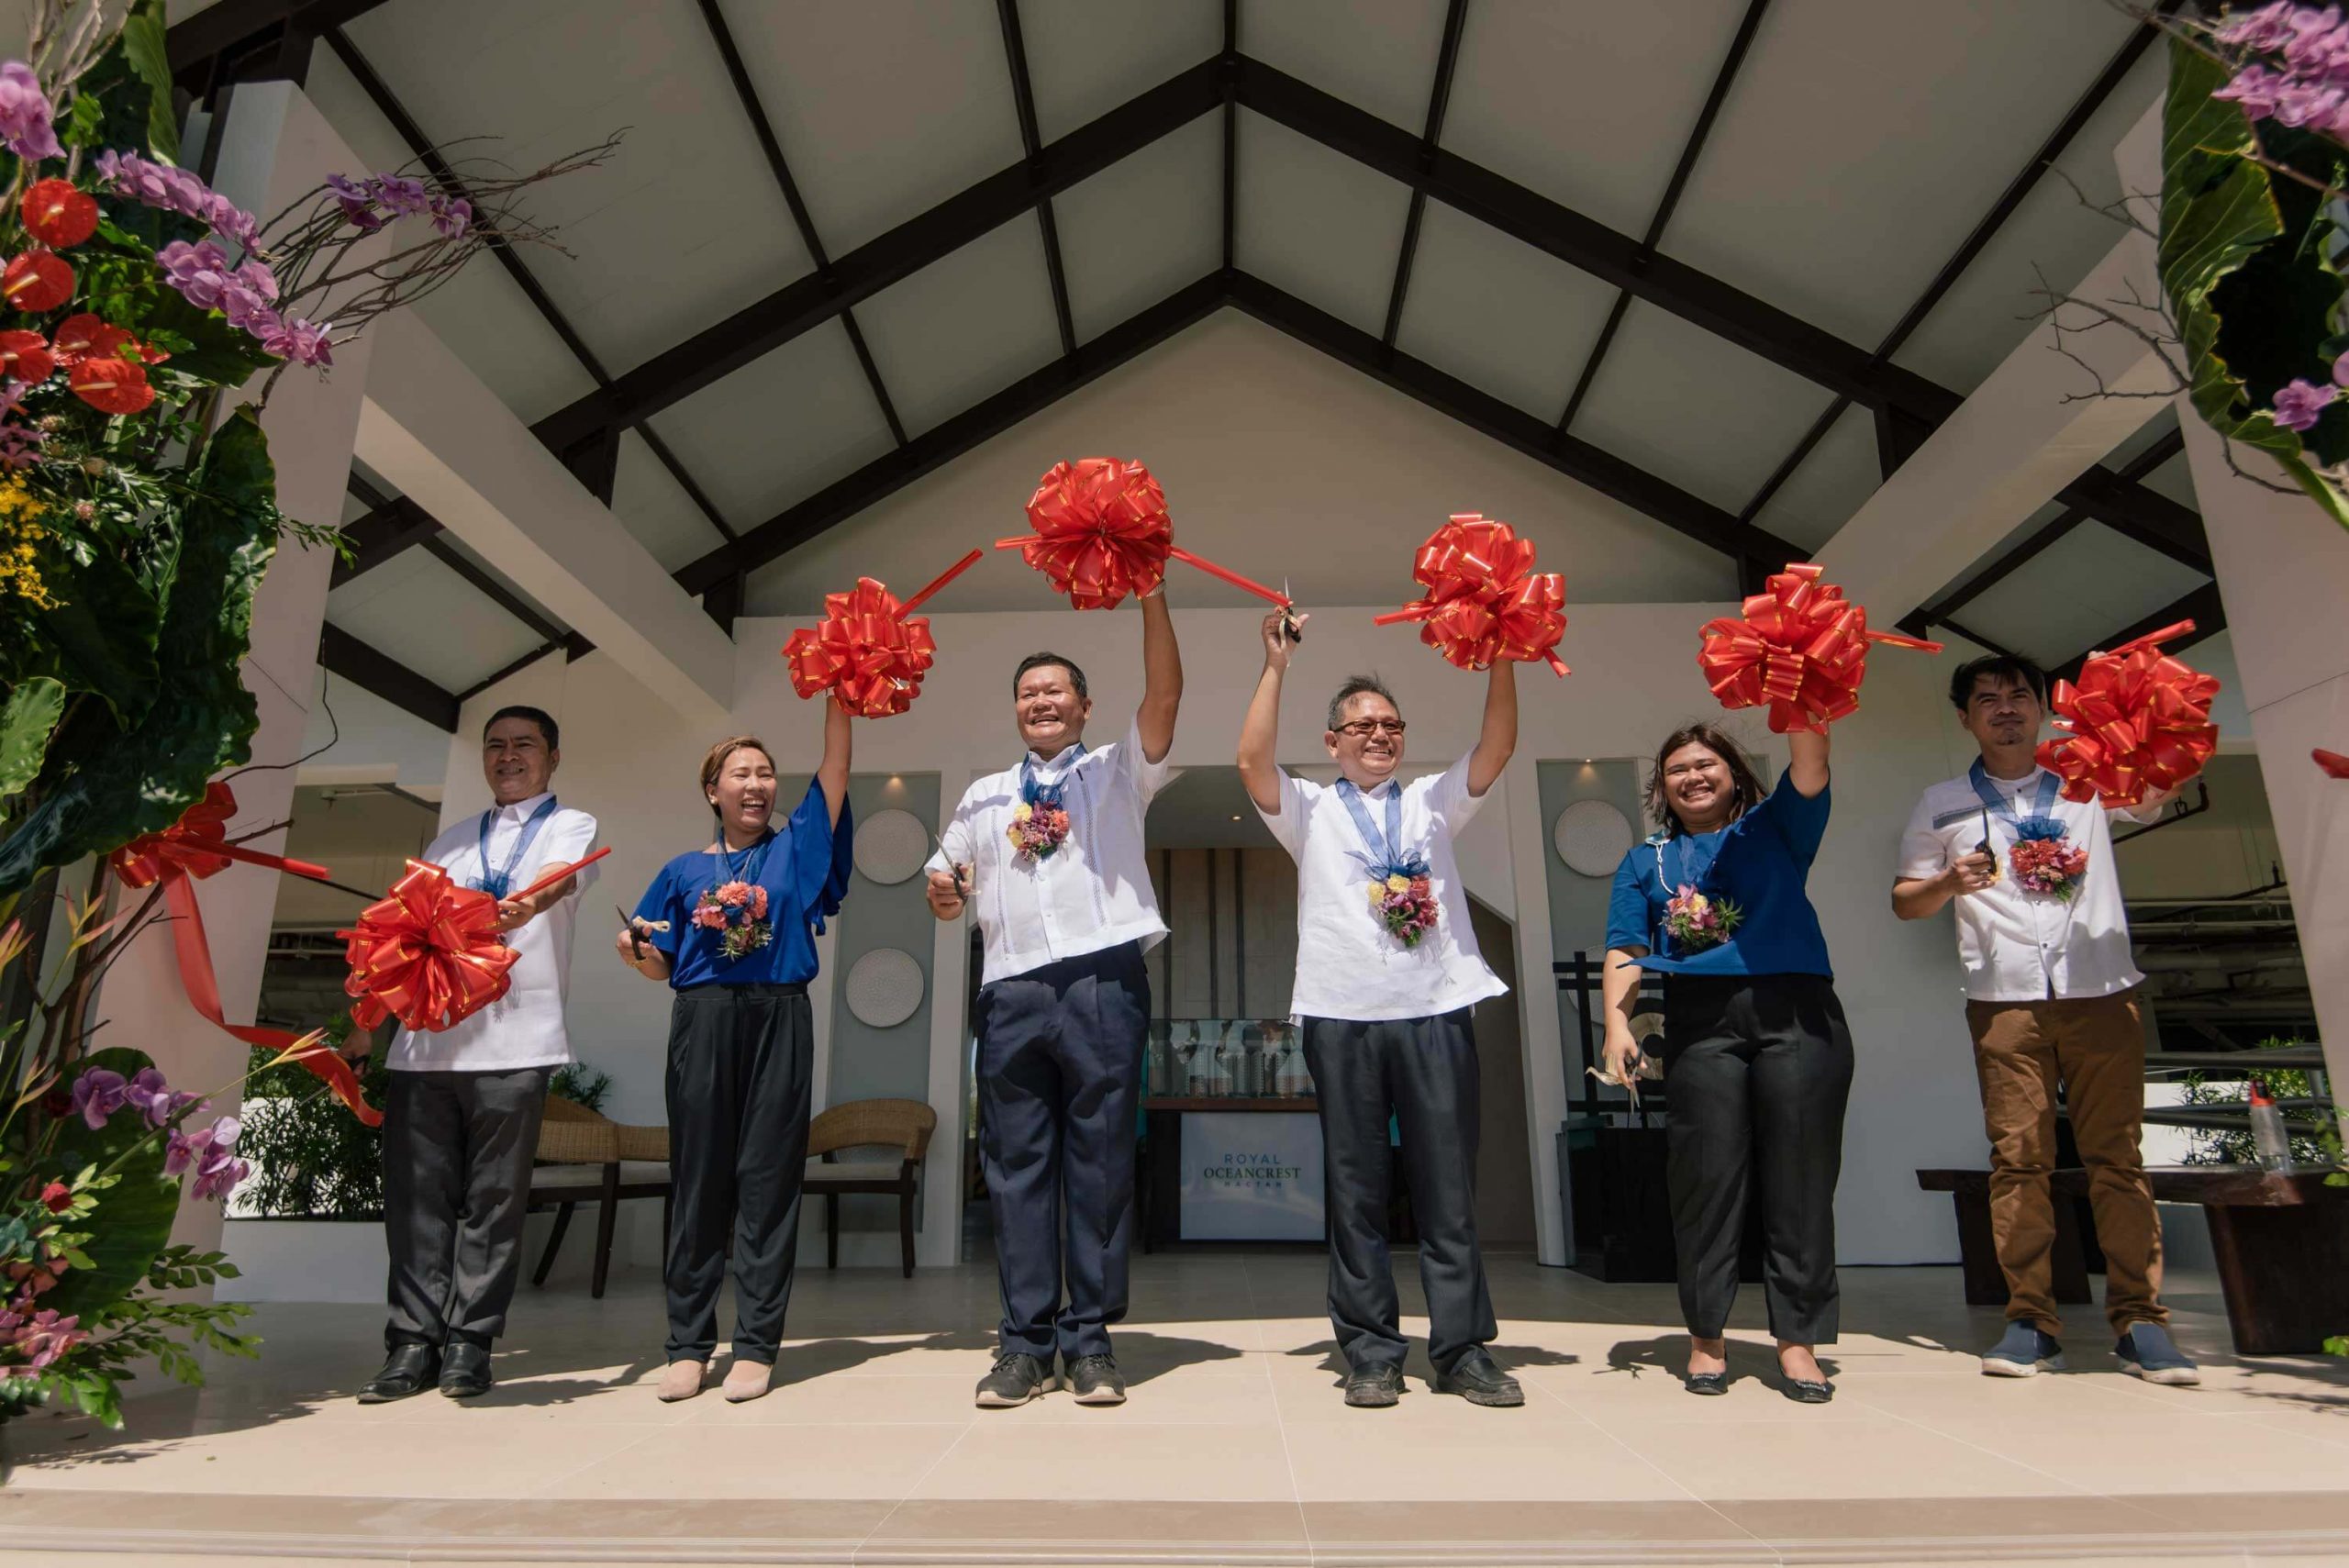 ROYAL OCEANCREST MACTAN SHOWROOM. Cutting the ribbon to mark the opening of the Royal Oceancrest Mactan showroom are (from left) Primary Homes Vice President for Sales and Marketing Ramero Espina, Customer Relations Manager Jenita Sales, Primary Group of Builders Chairman Engineer William Christopher Liu Jr., Primary Homes President Architect Stephen Charles Liu, Marketing Manager Michelle Cutang, and Sales Operation Team Head Francis Icamen.